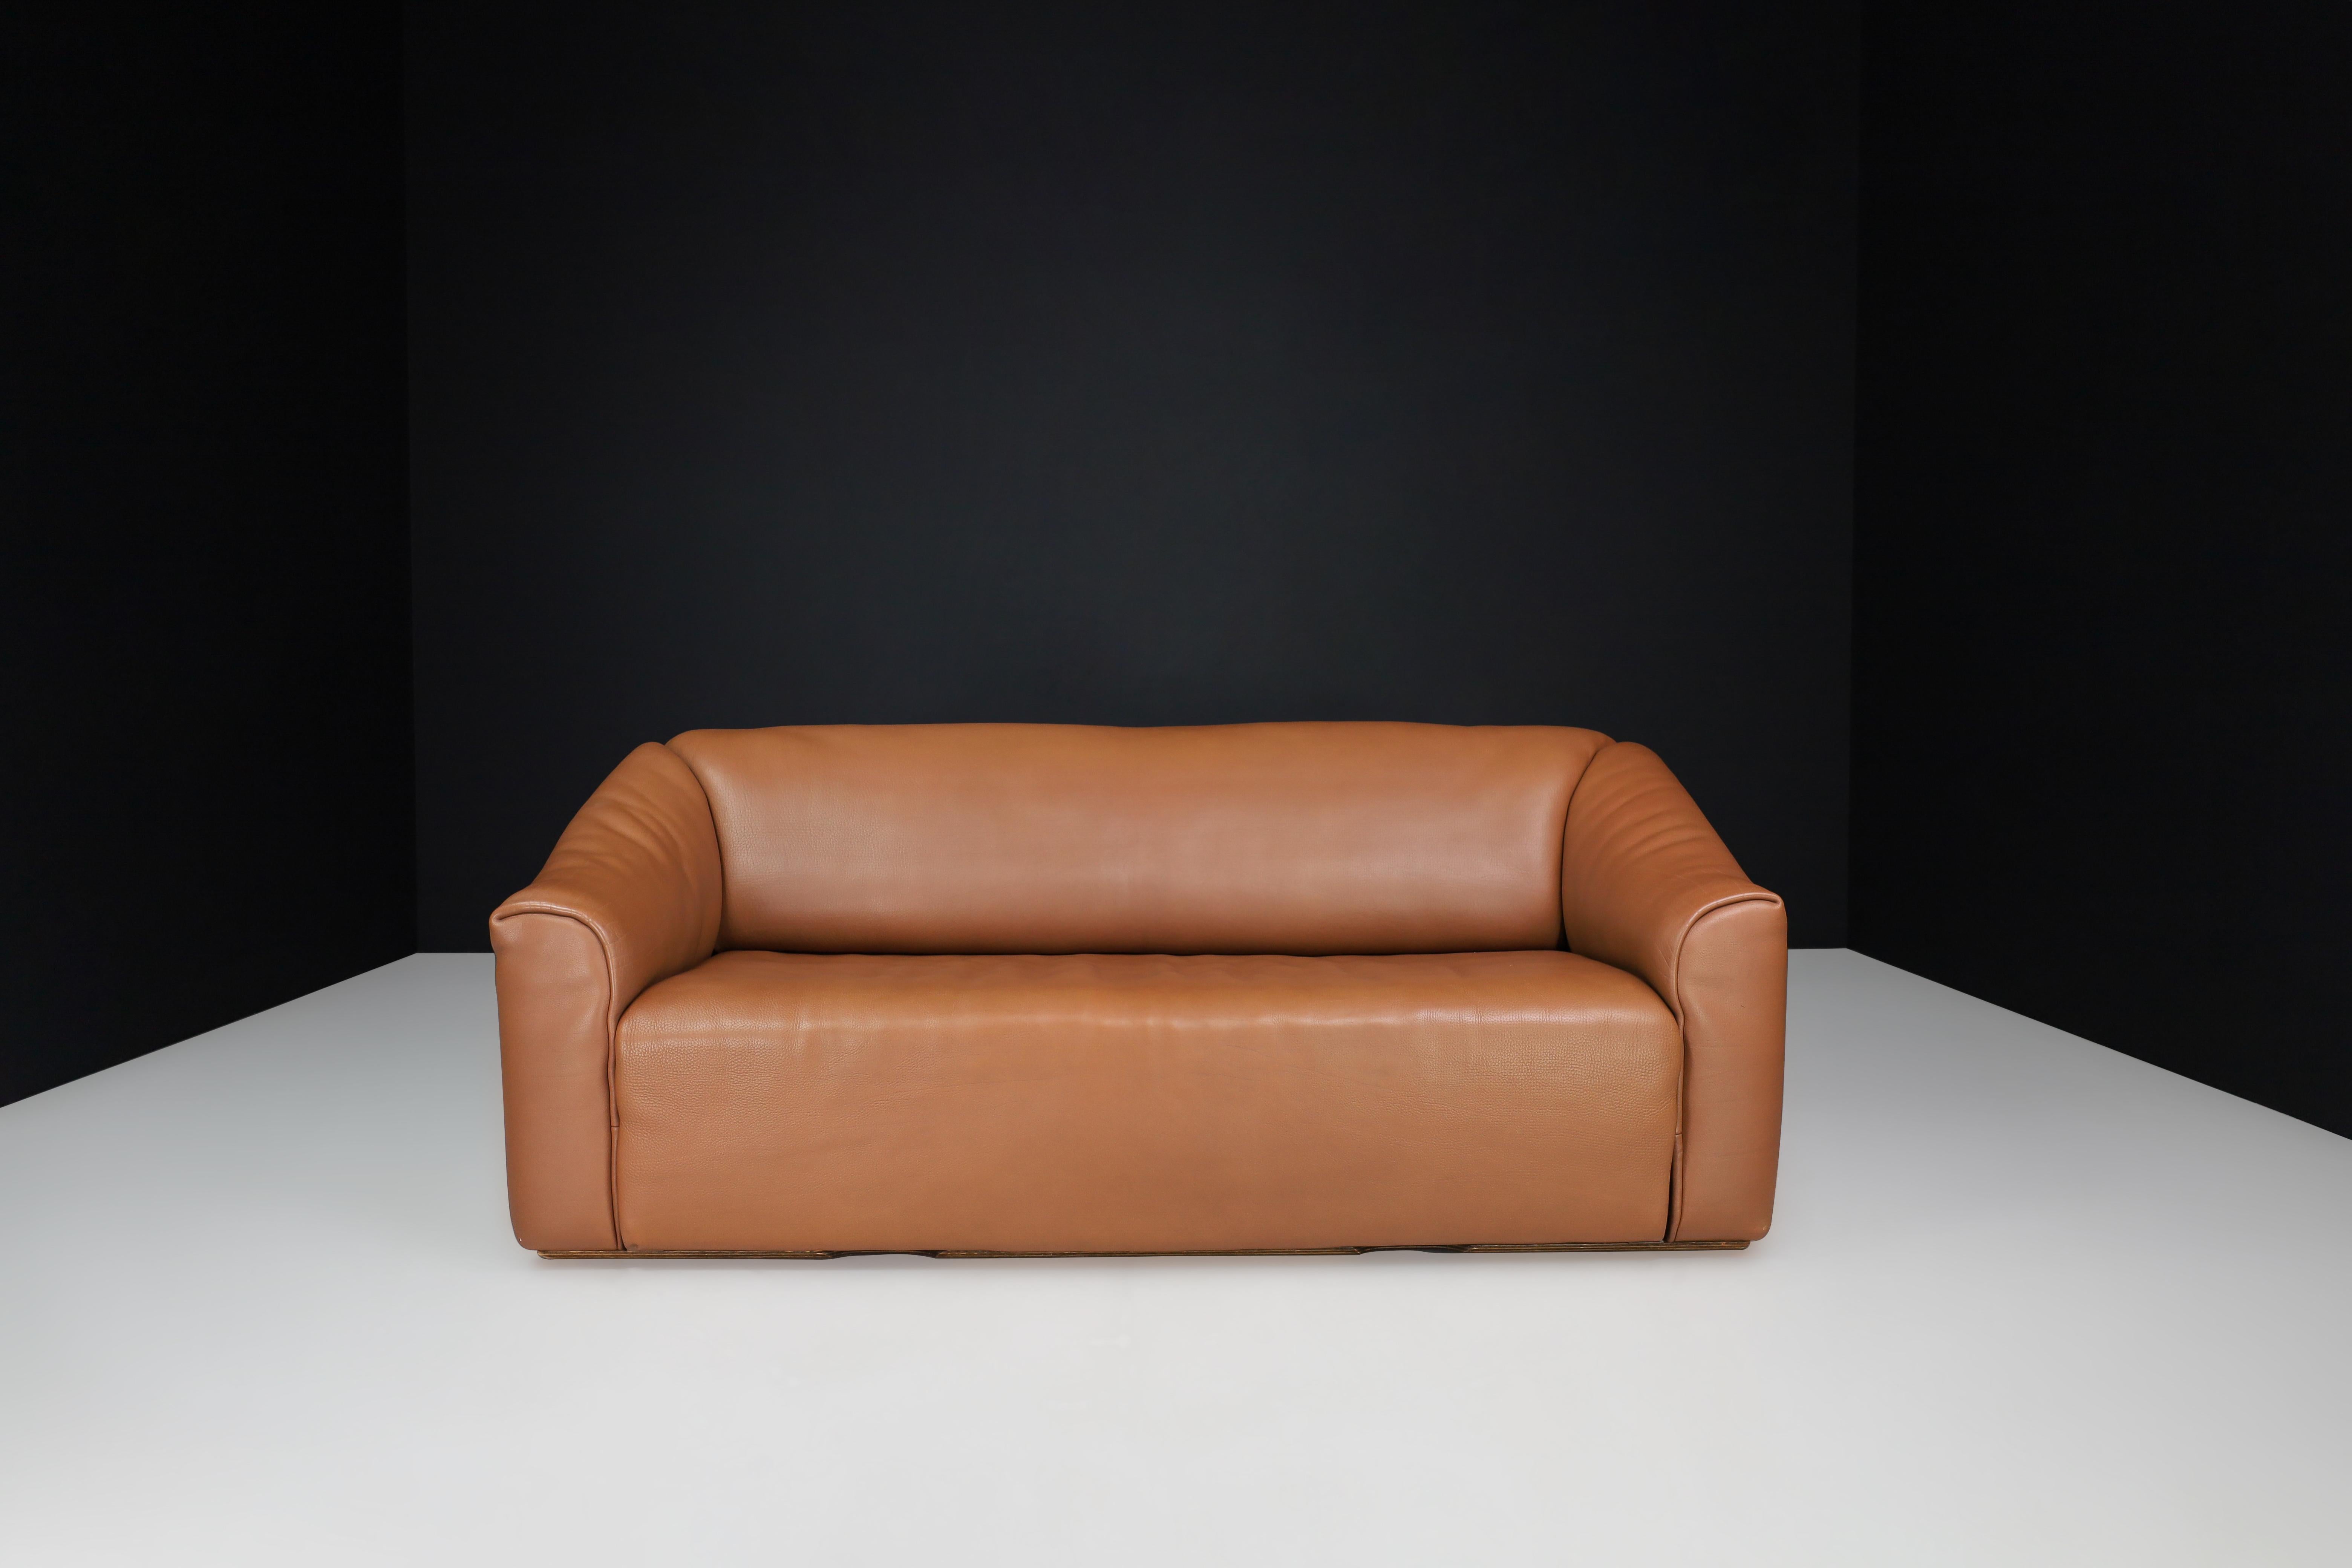 De Sede DS-47 neck leather sofa from Switzerland, 1970s

Presenting a De Sede DS-47 Neck Leather Sofa from Switzerland, crafted in the 1970s. This sofa is a sturdy and comfortable piece, constructed with 5mm thick NECK leather, boasting unique